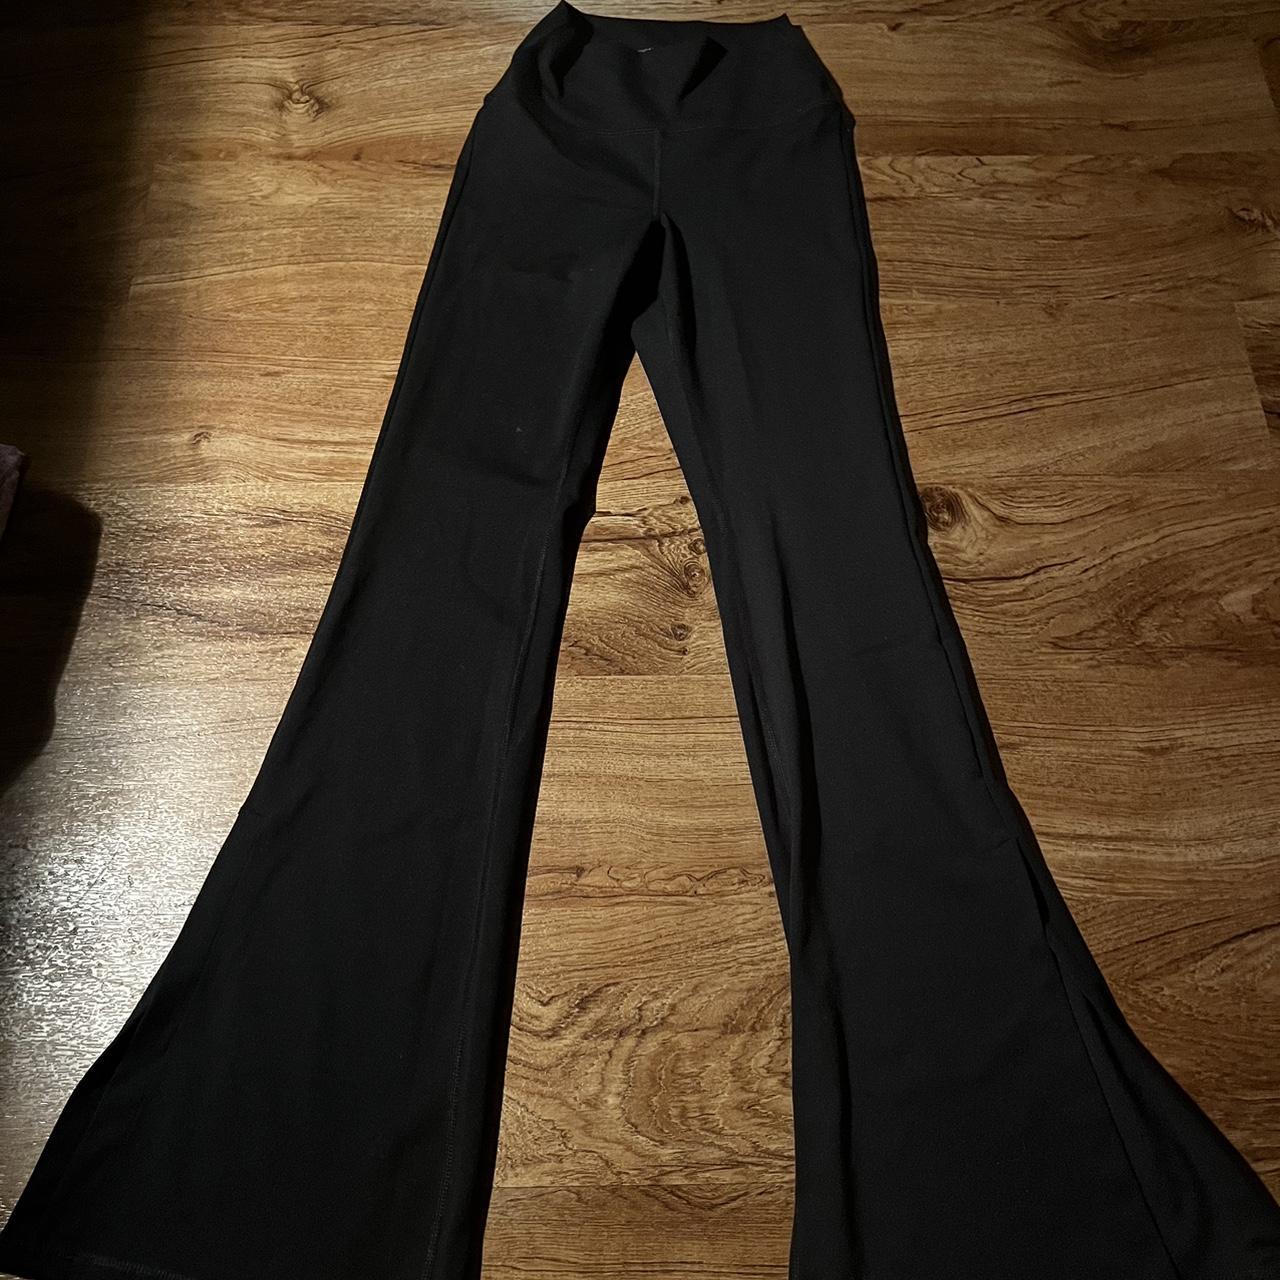 yogalicious flared leggings with slit size xs never - Depop